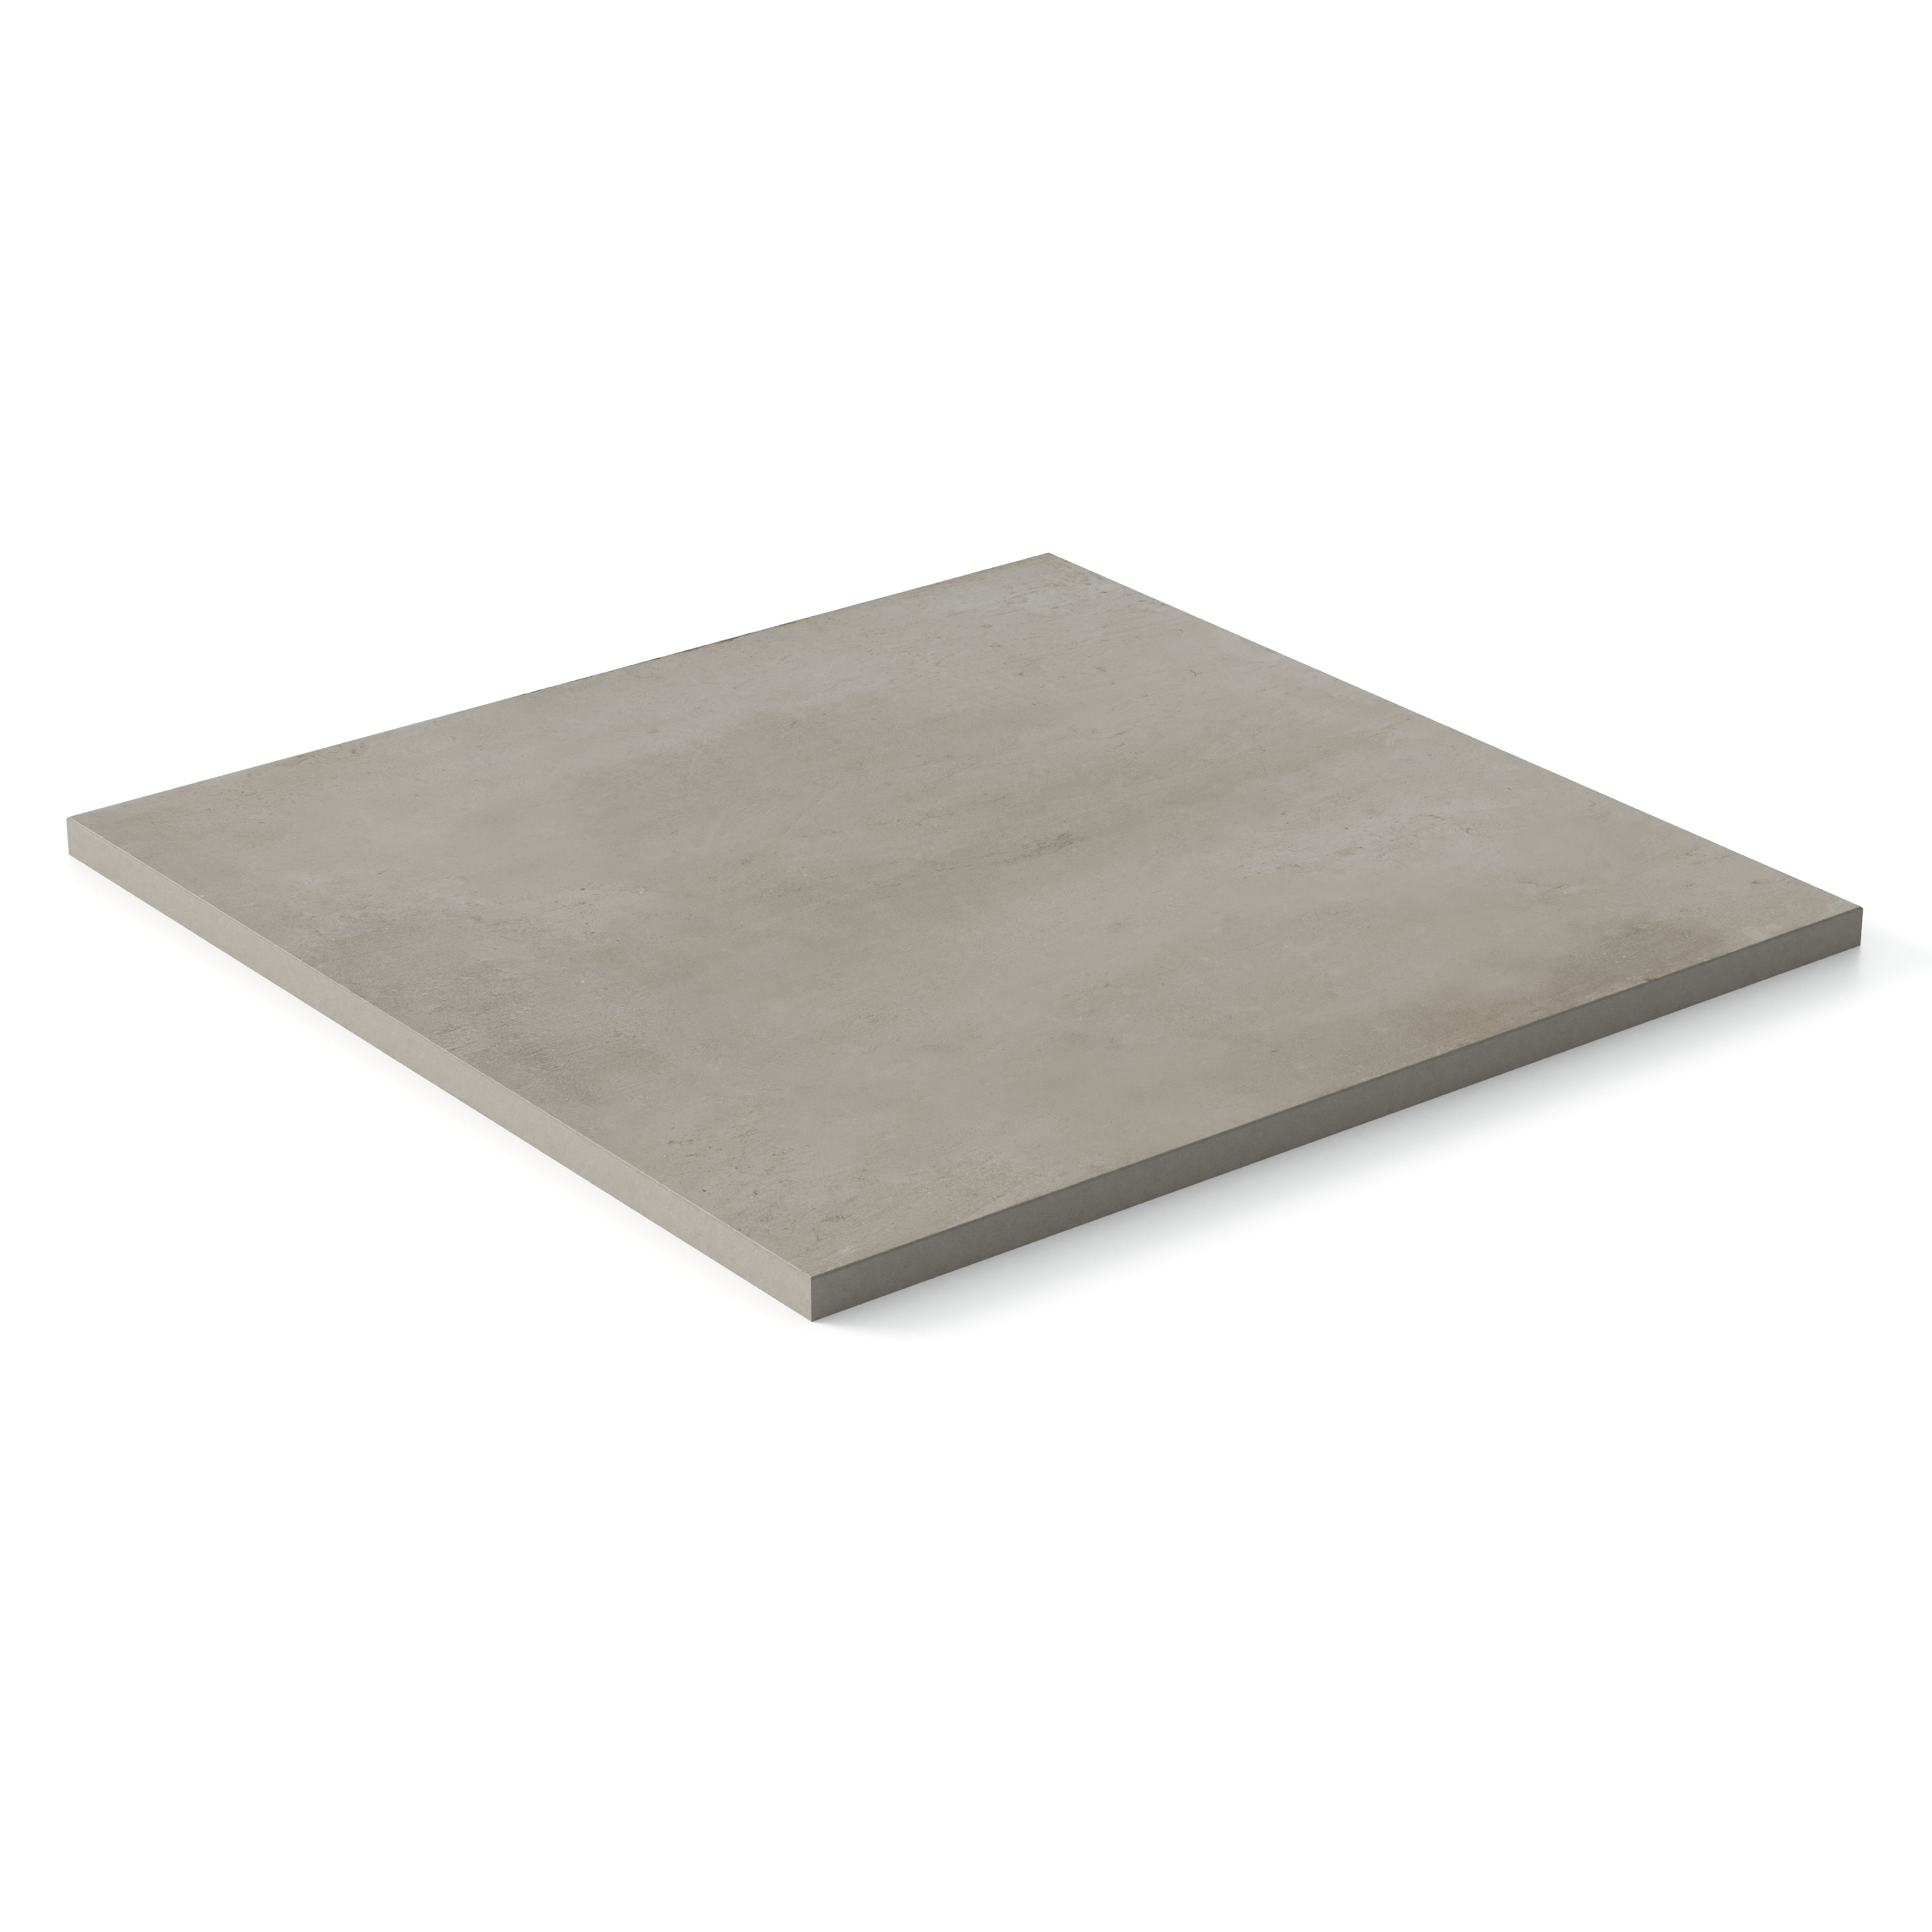 Ramsey 24x24 Grip Porcelain 2cm Paver Tile in Putty